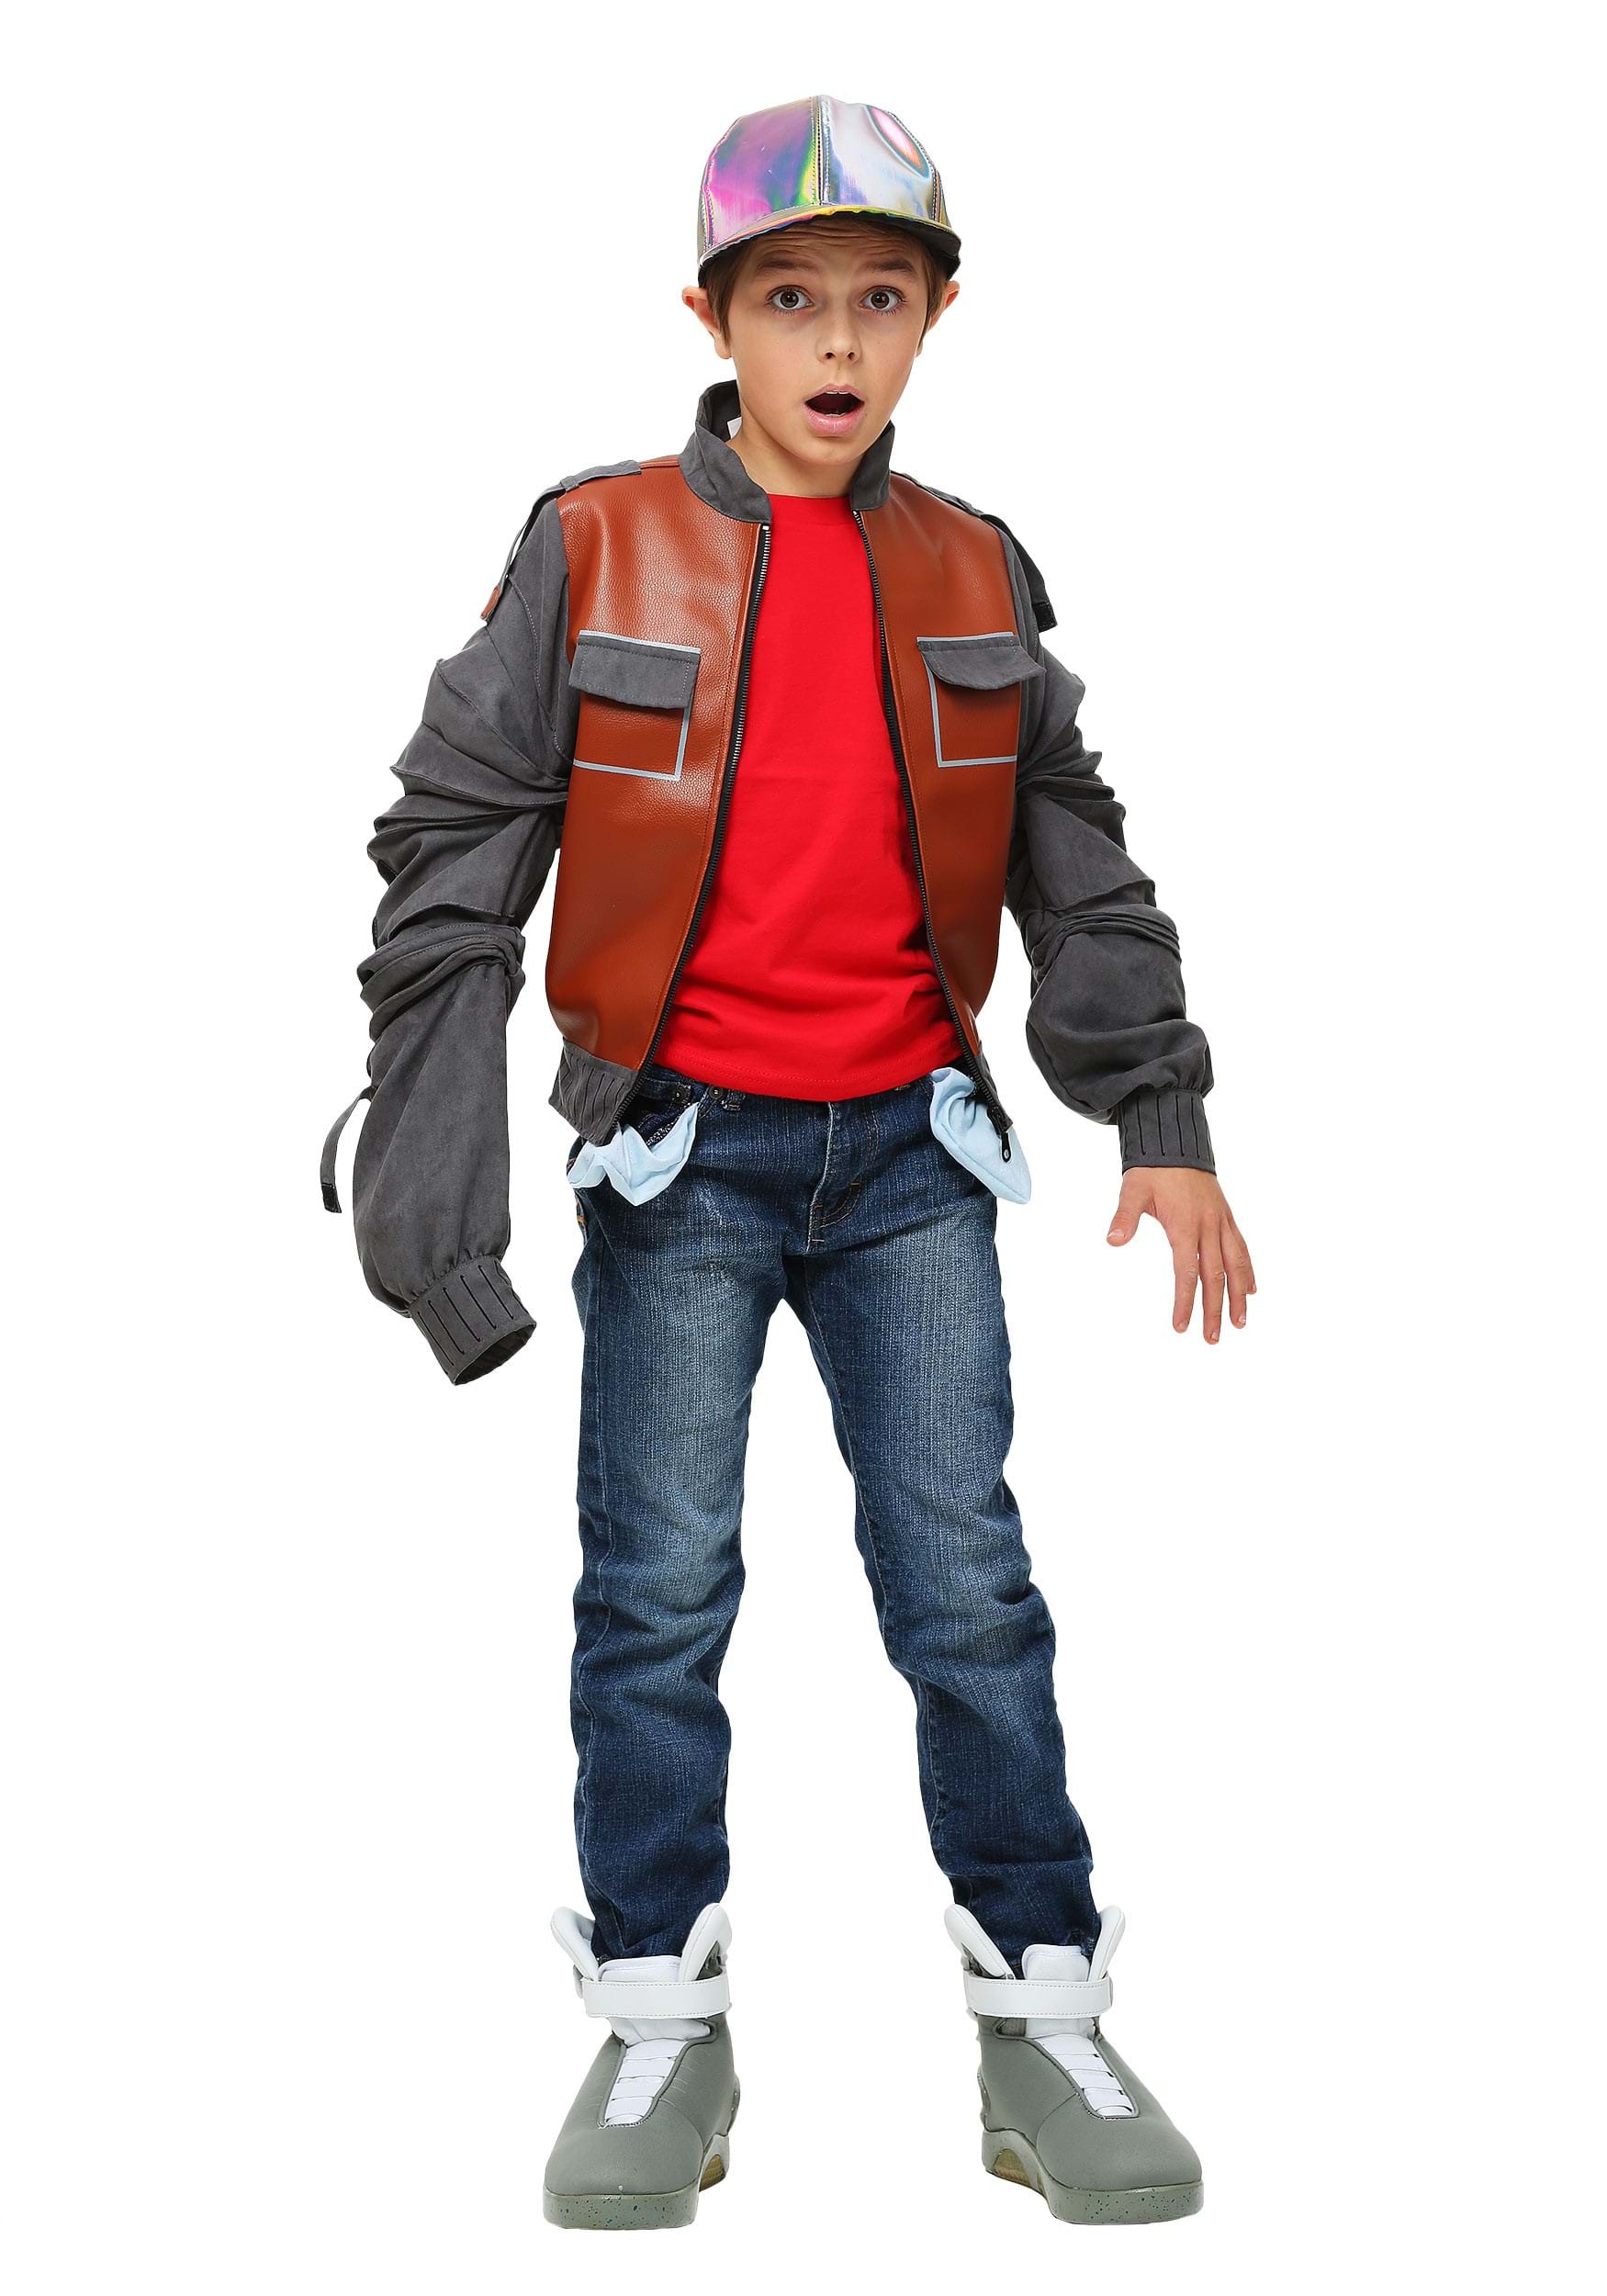 Photos - Fancy Dress FUN Costumes Kid's Back to the Future Marty McFly Costume Jacket Yellow